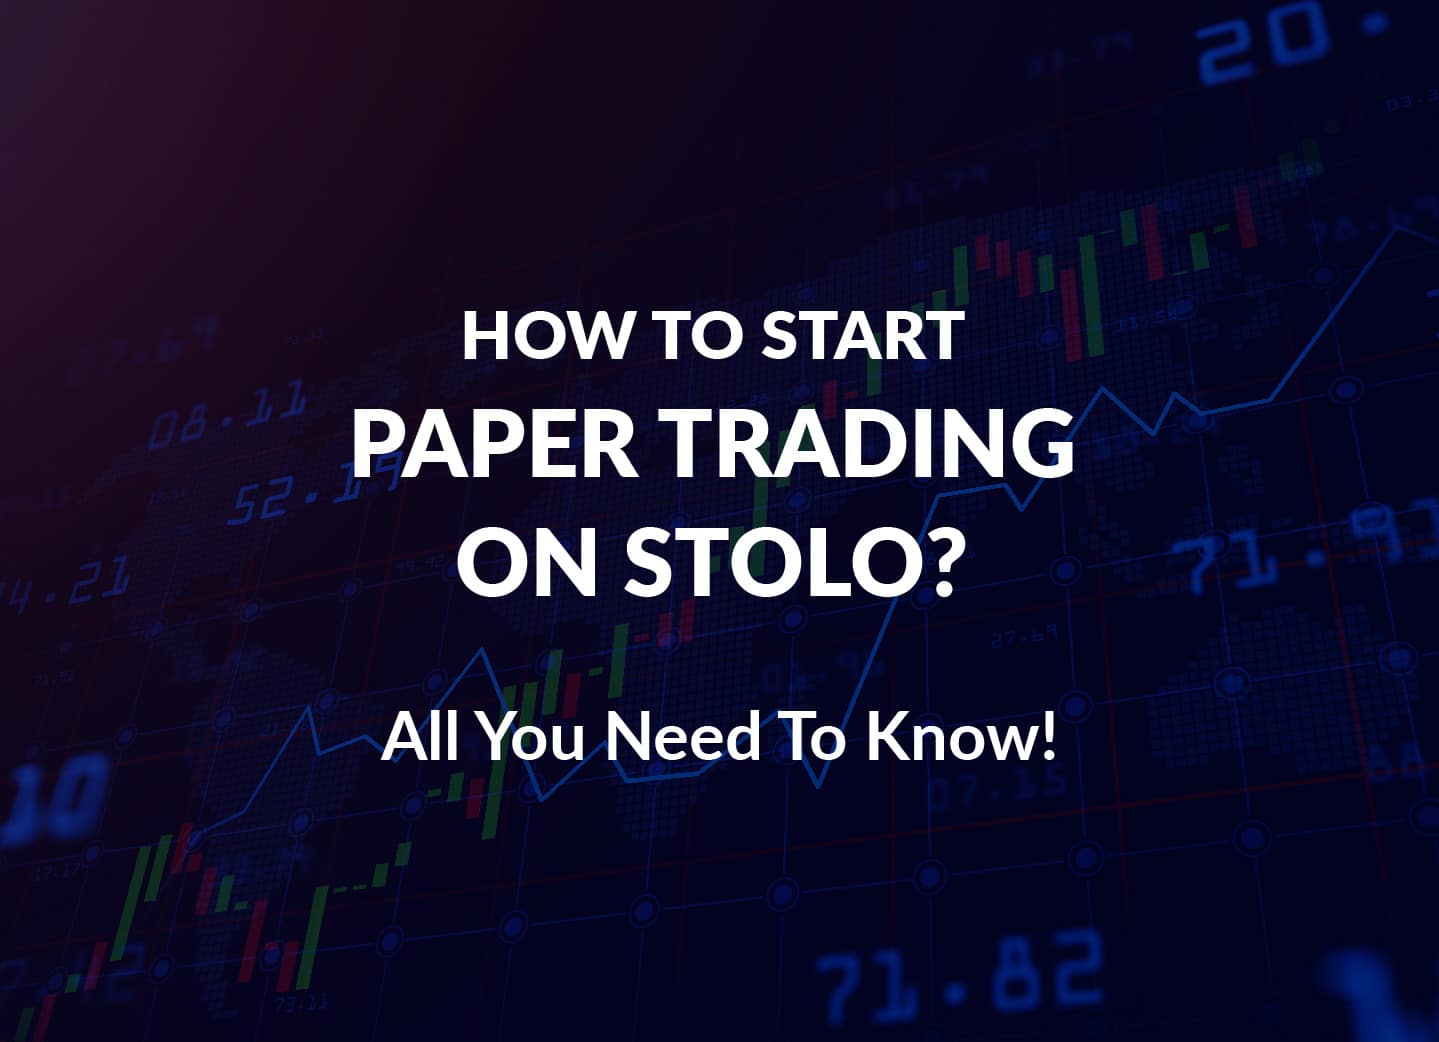 How to Start Paper Trading on Stolo? All You Need To Know!